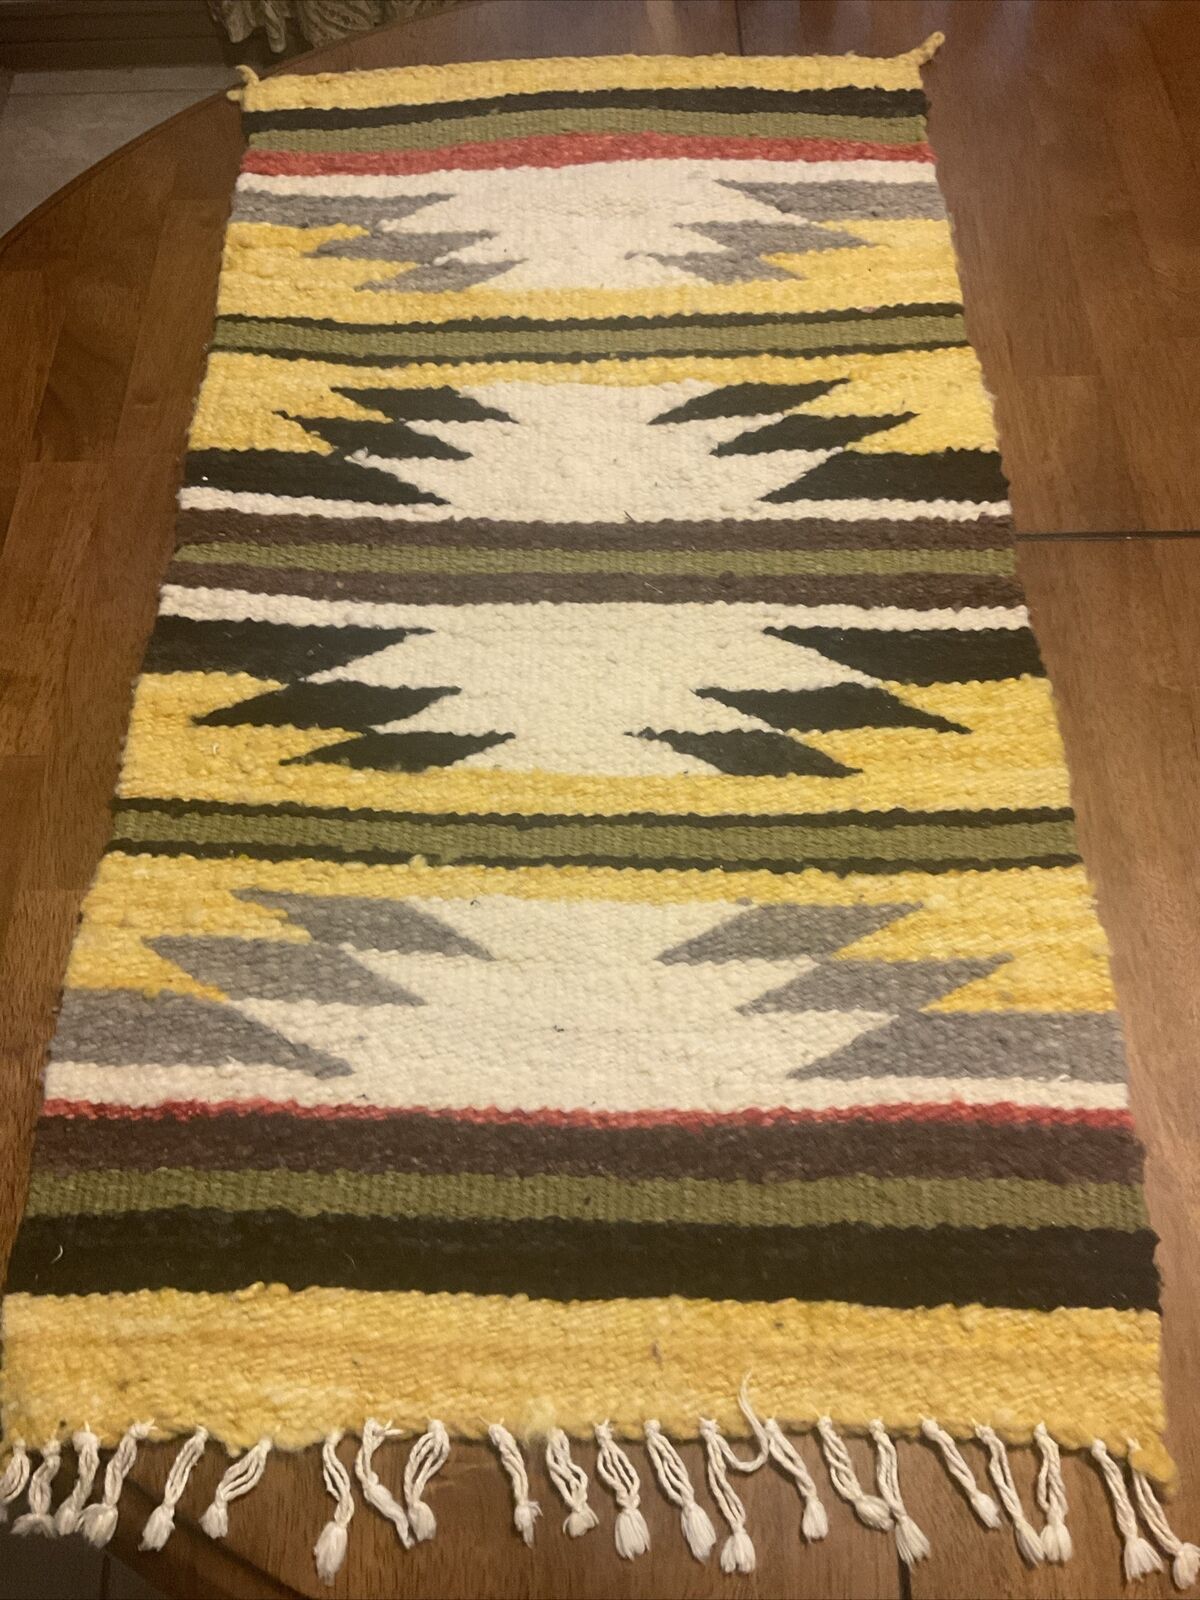 VINTAGE NATIVE AMERICAN STYLE RUG WALL TABLE TEXTILE WOVEN  32”x17”